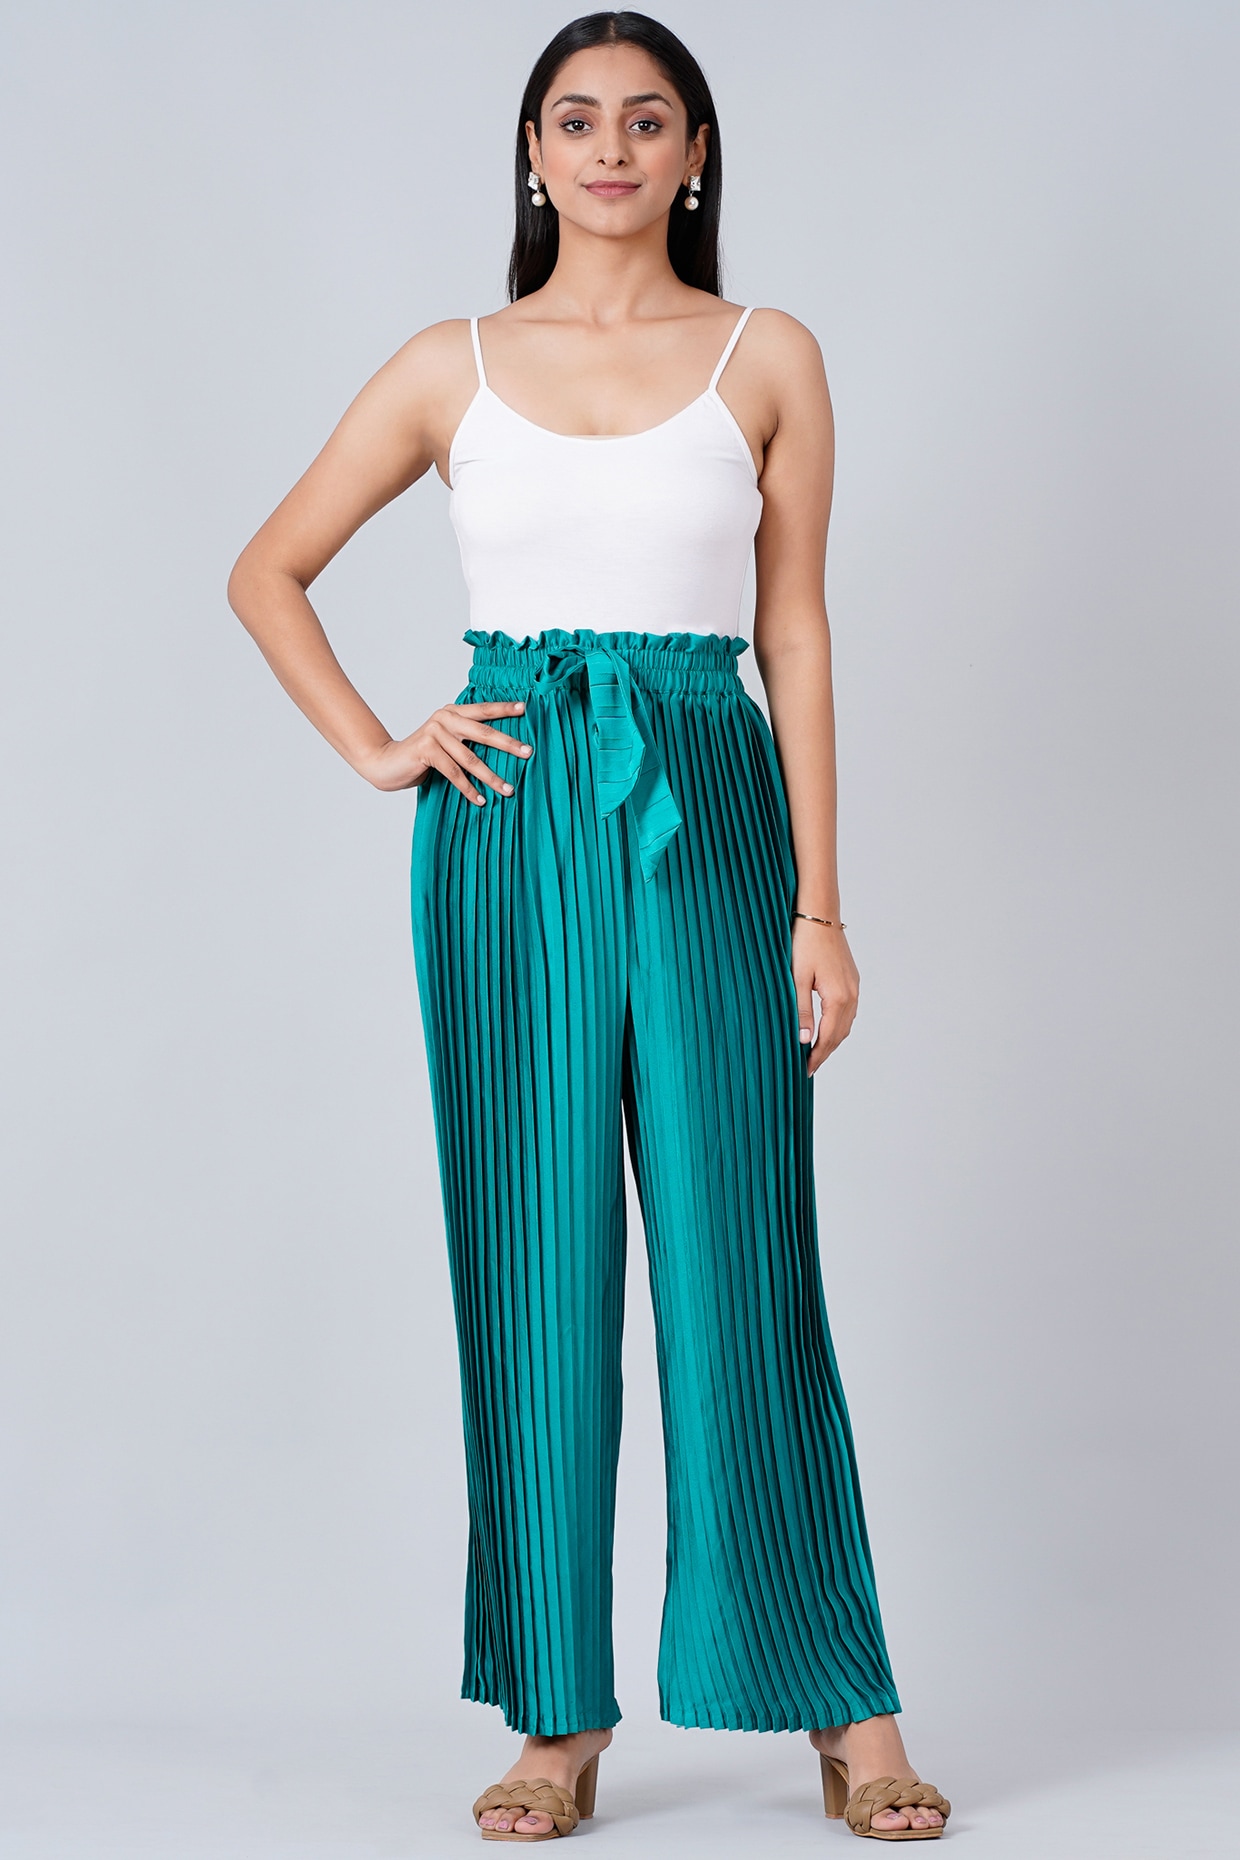 Turquoise Pleated Palazzo Pants Design by First Resort by Ramola